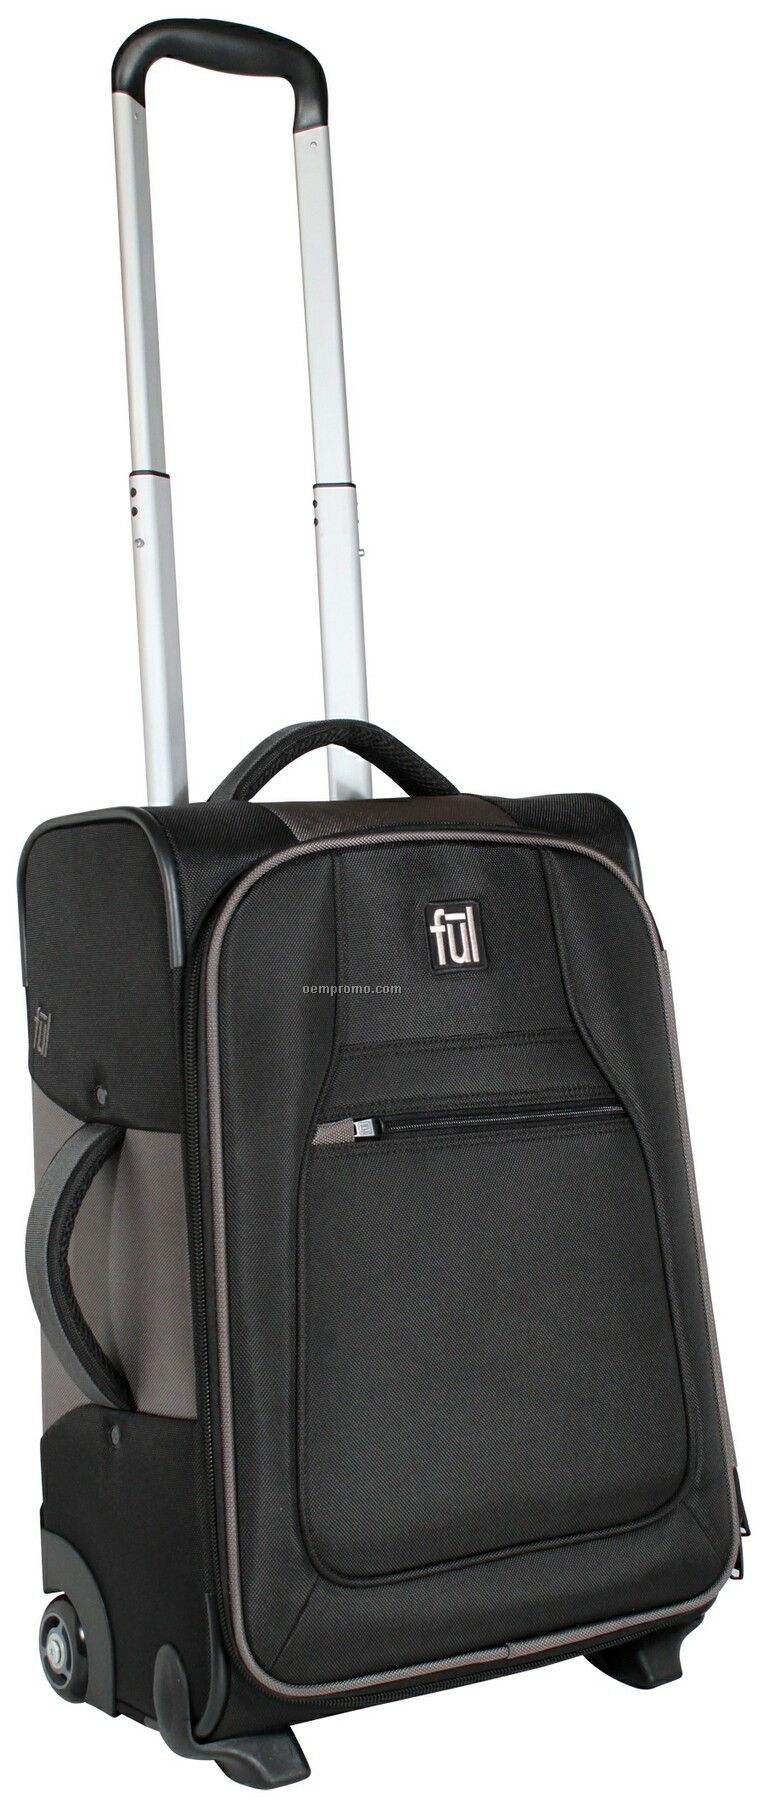 Ful Premiere 21" Carry-on Upright